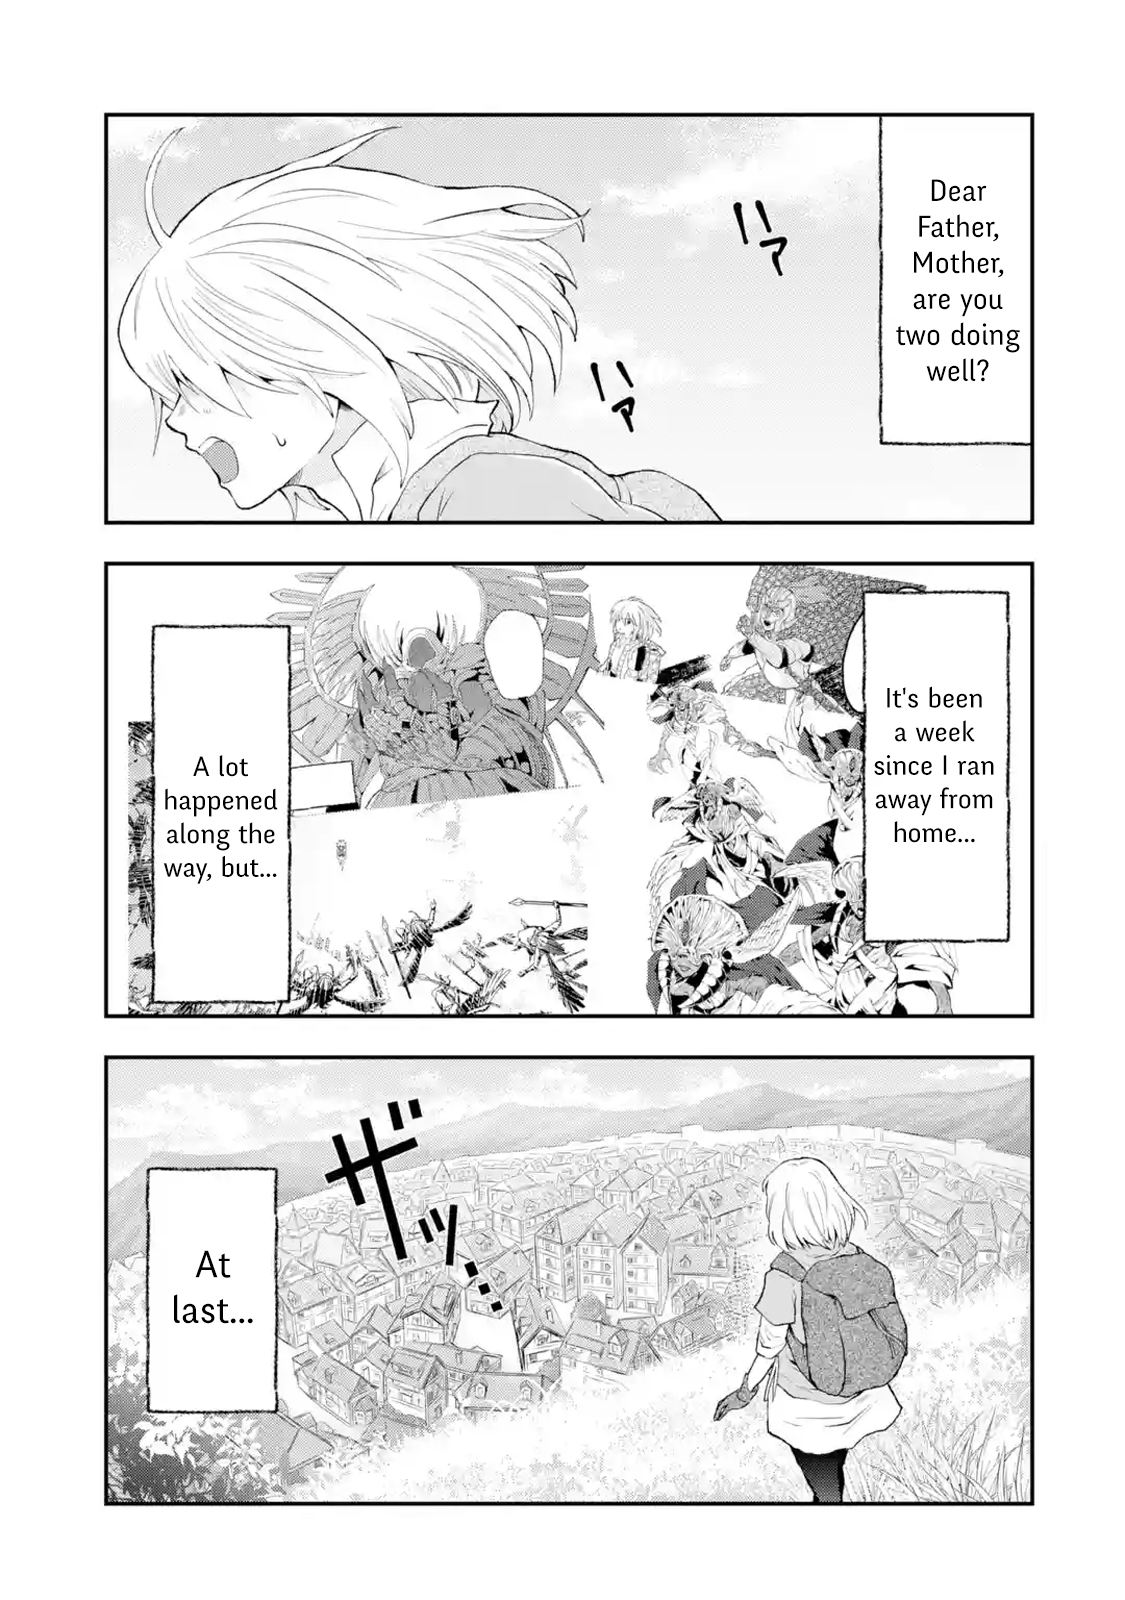 That Inferior Knight, Lv. 999 - Page 1